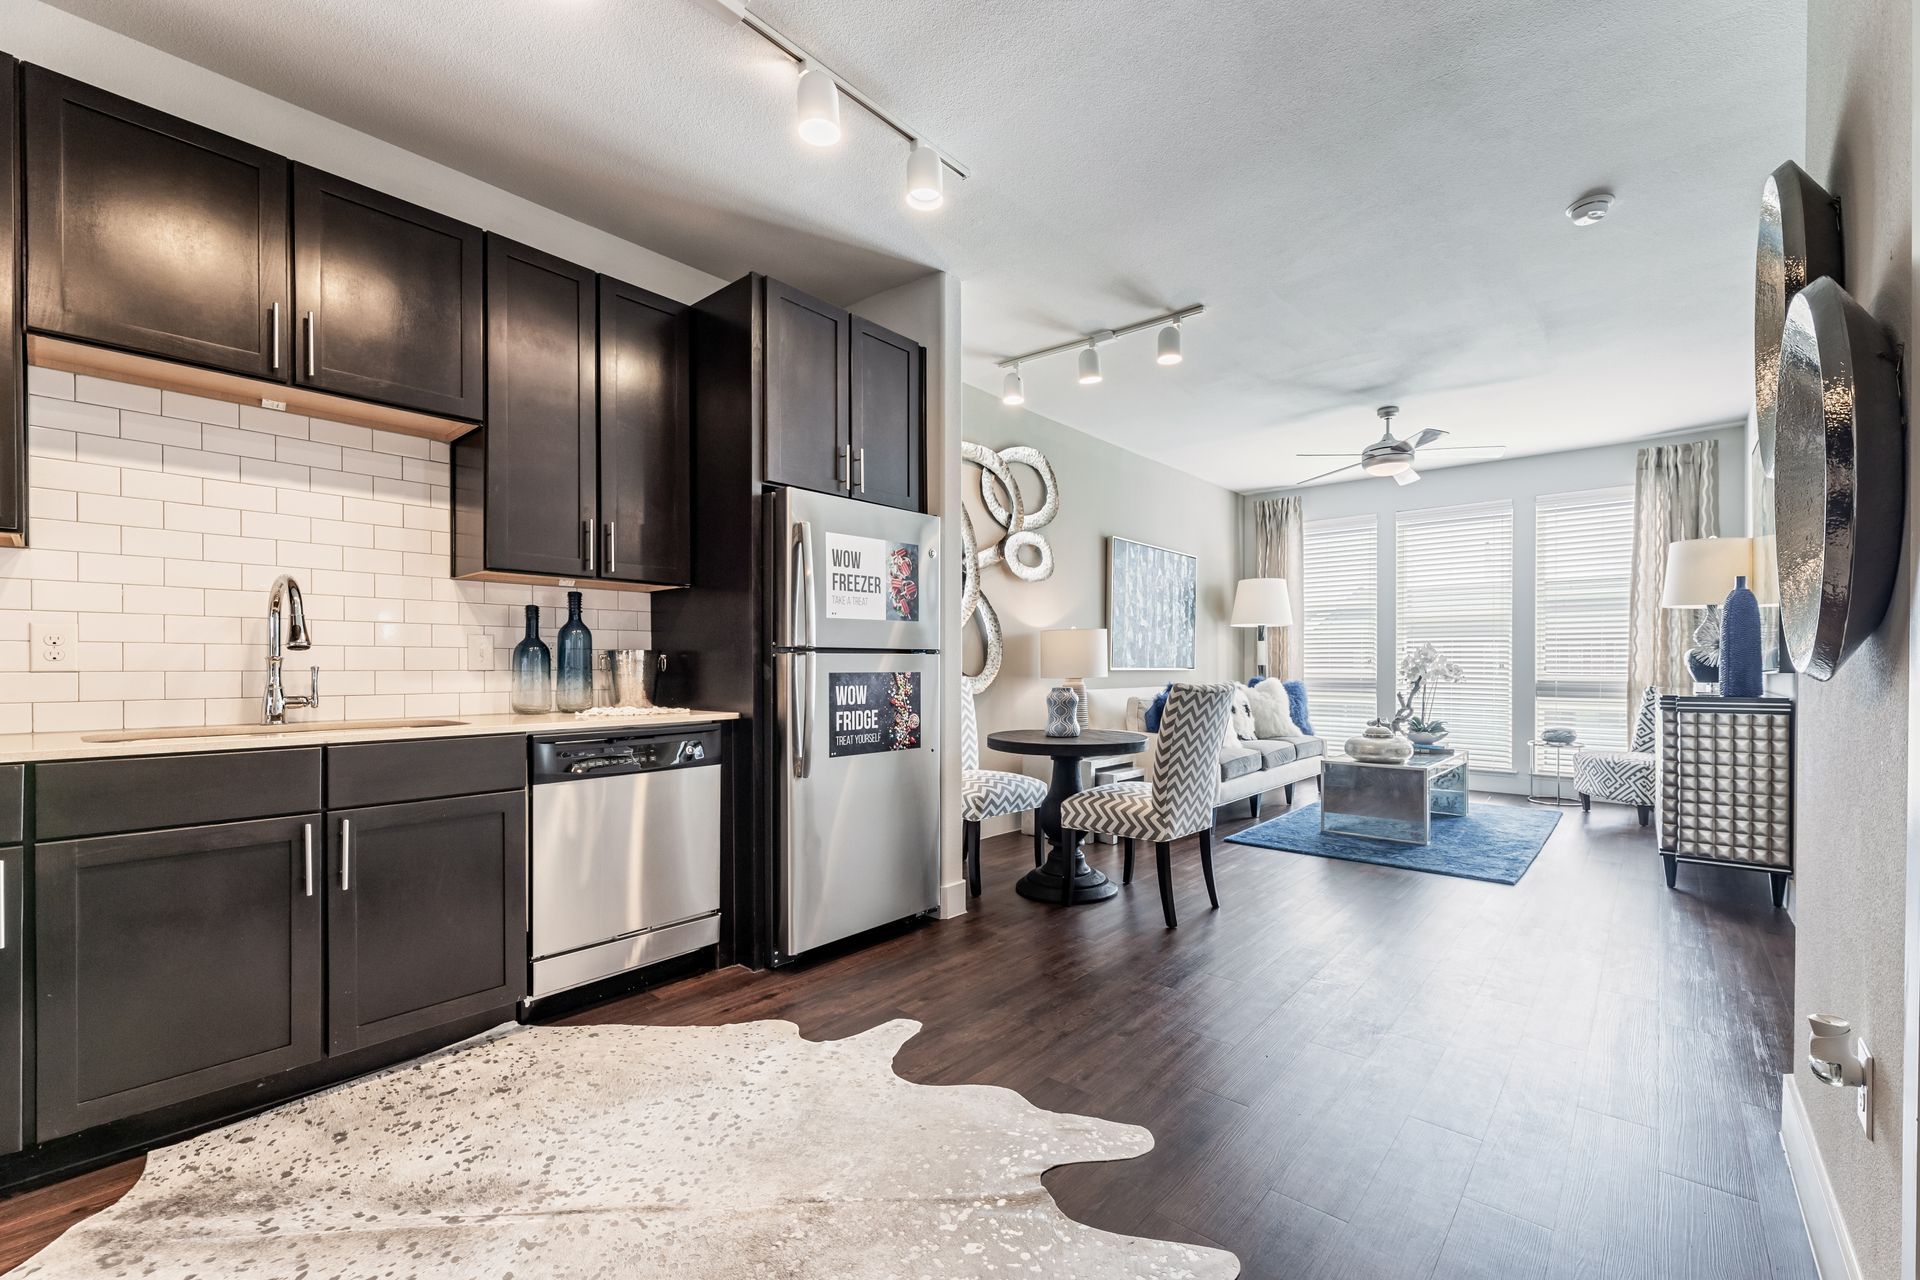 A kitchen with black cabinets and stainless steel appliances and a rug on the floor at Parkside at Craig Ranch.